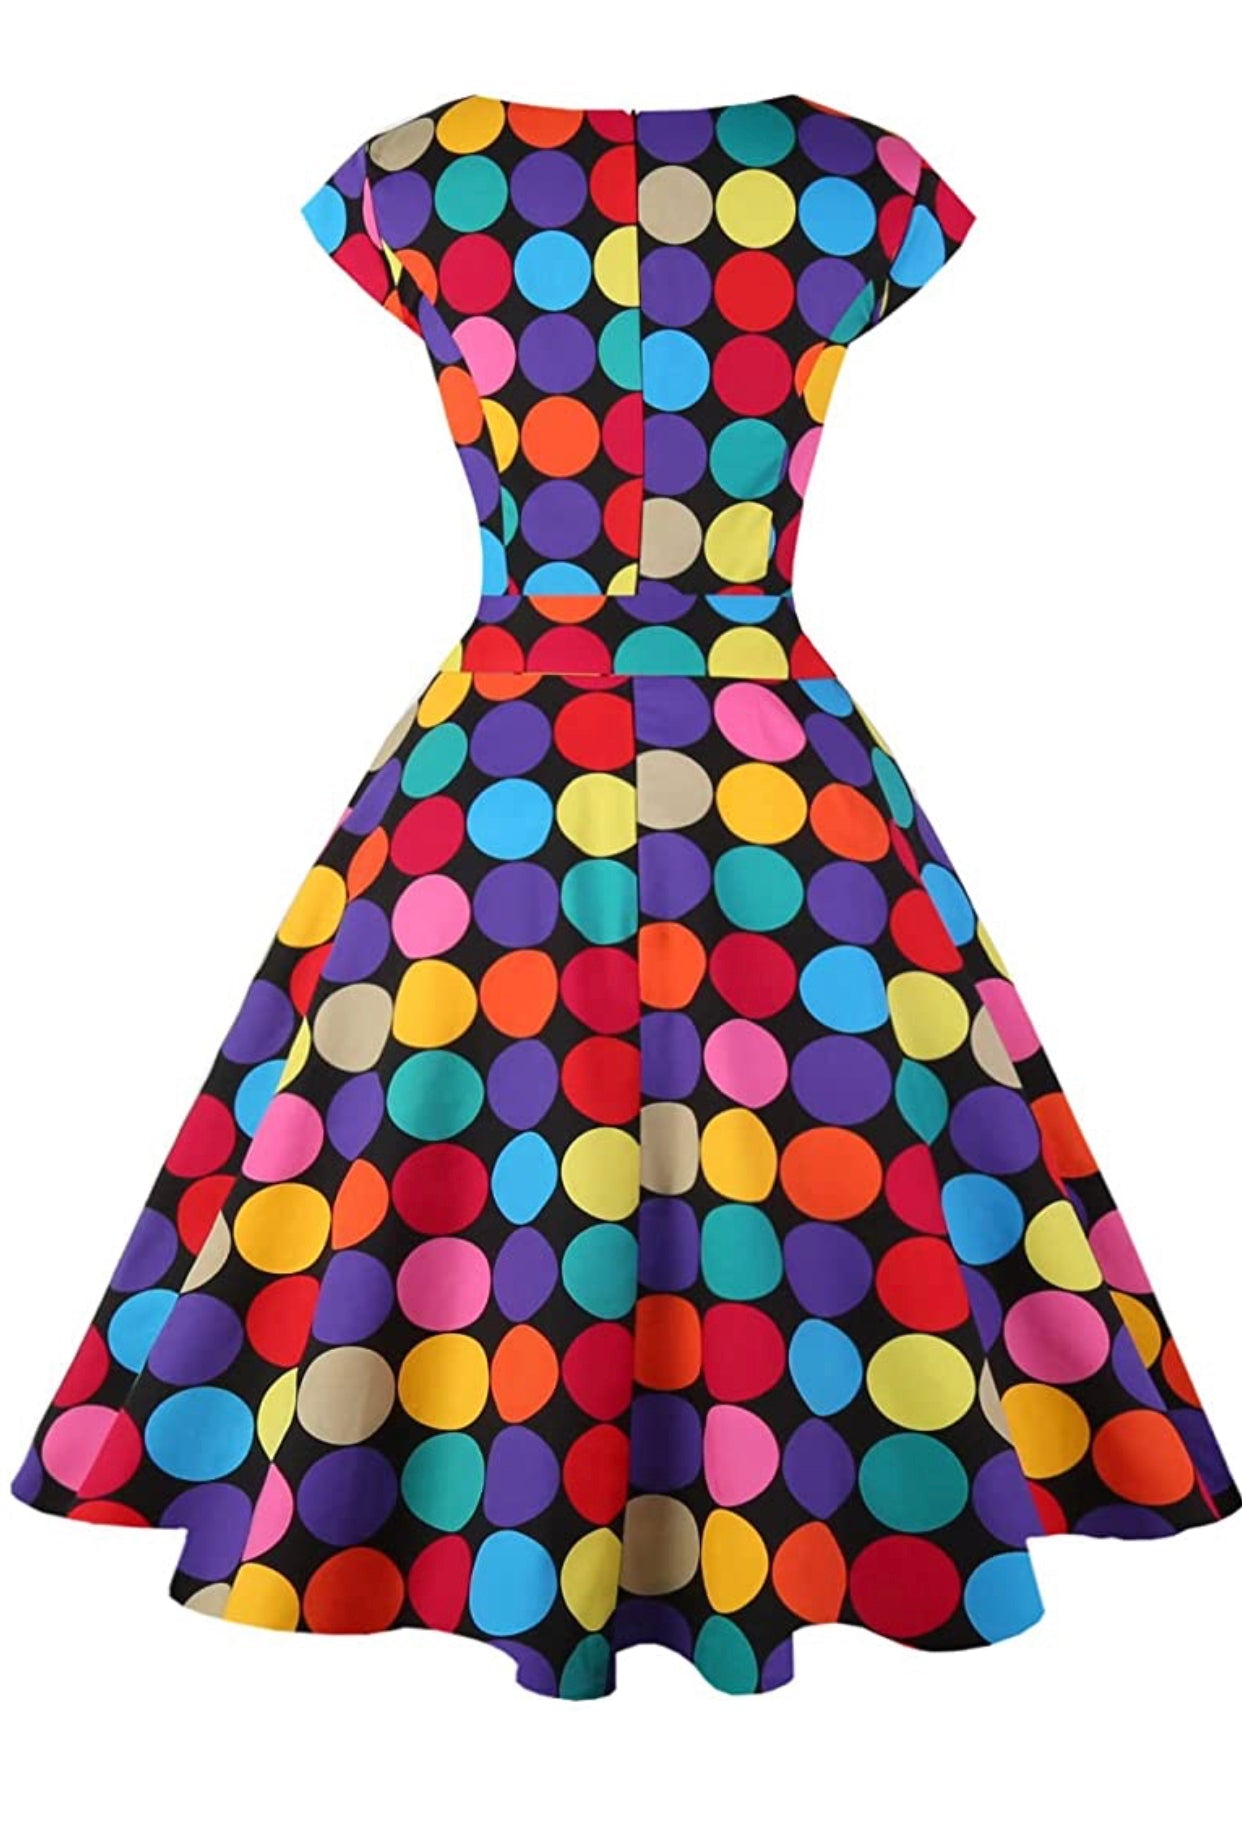 1950s Inspired Retro Inspired Dress, Multi-Colored Polka Dot, Sizes XS - 3XL - Uylee's Boutique